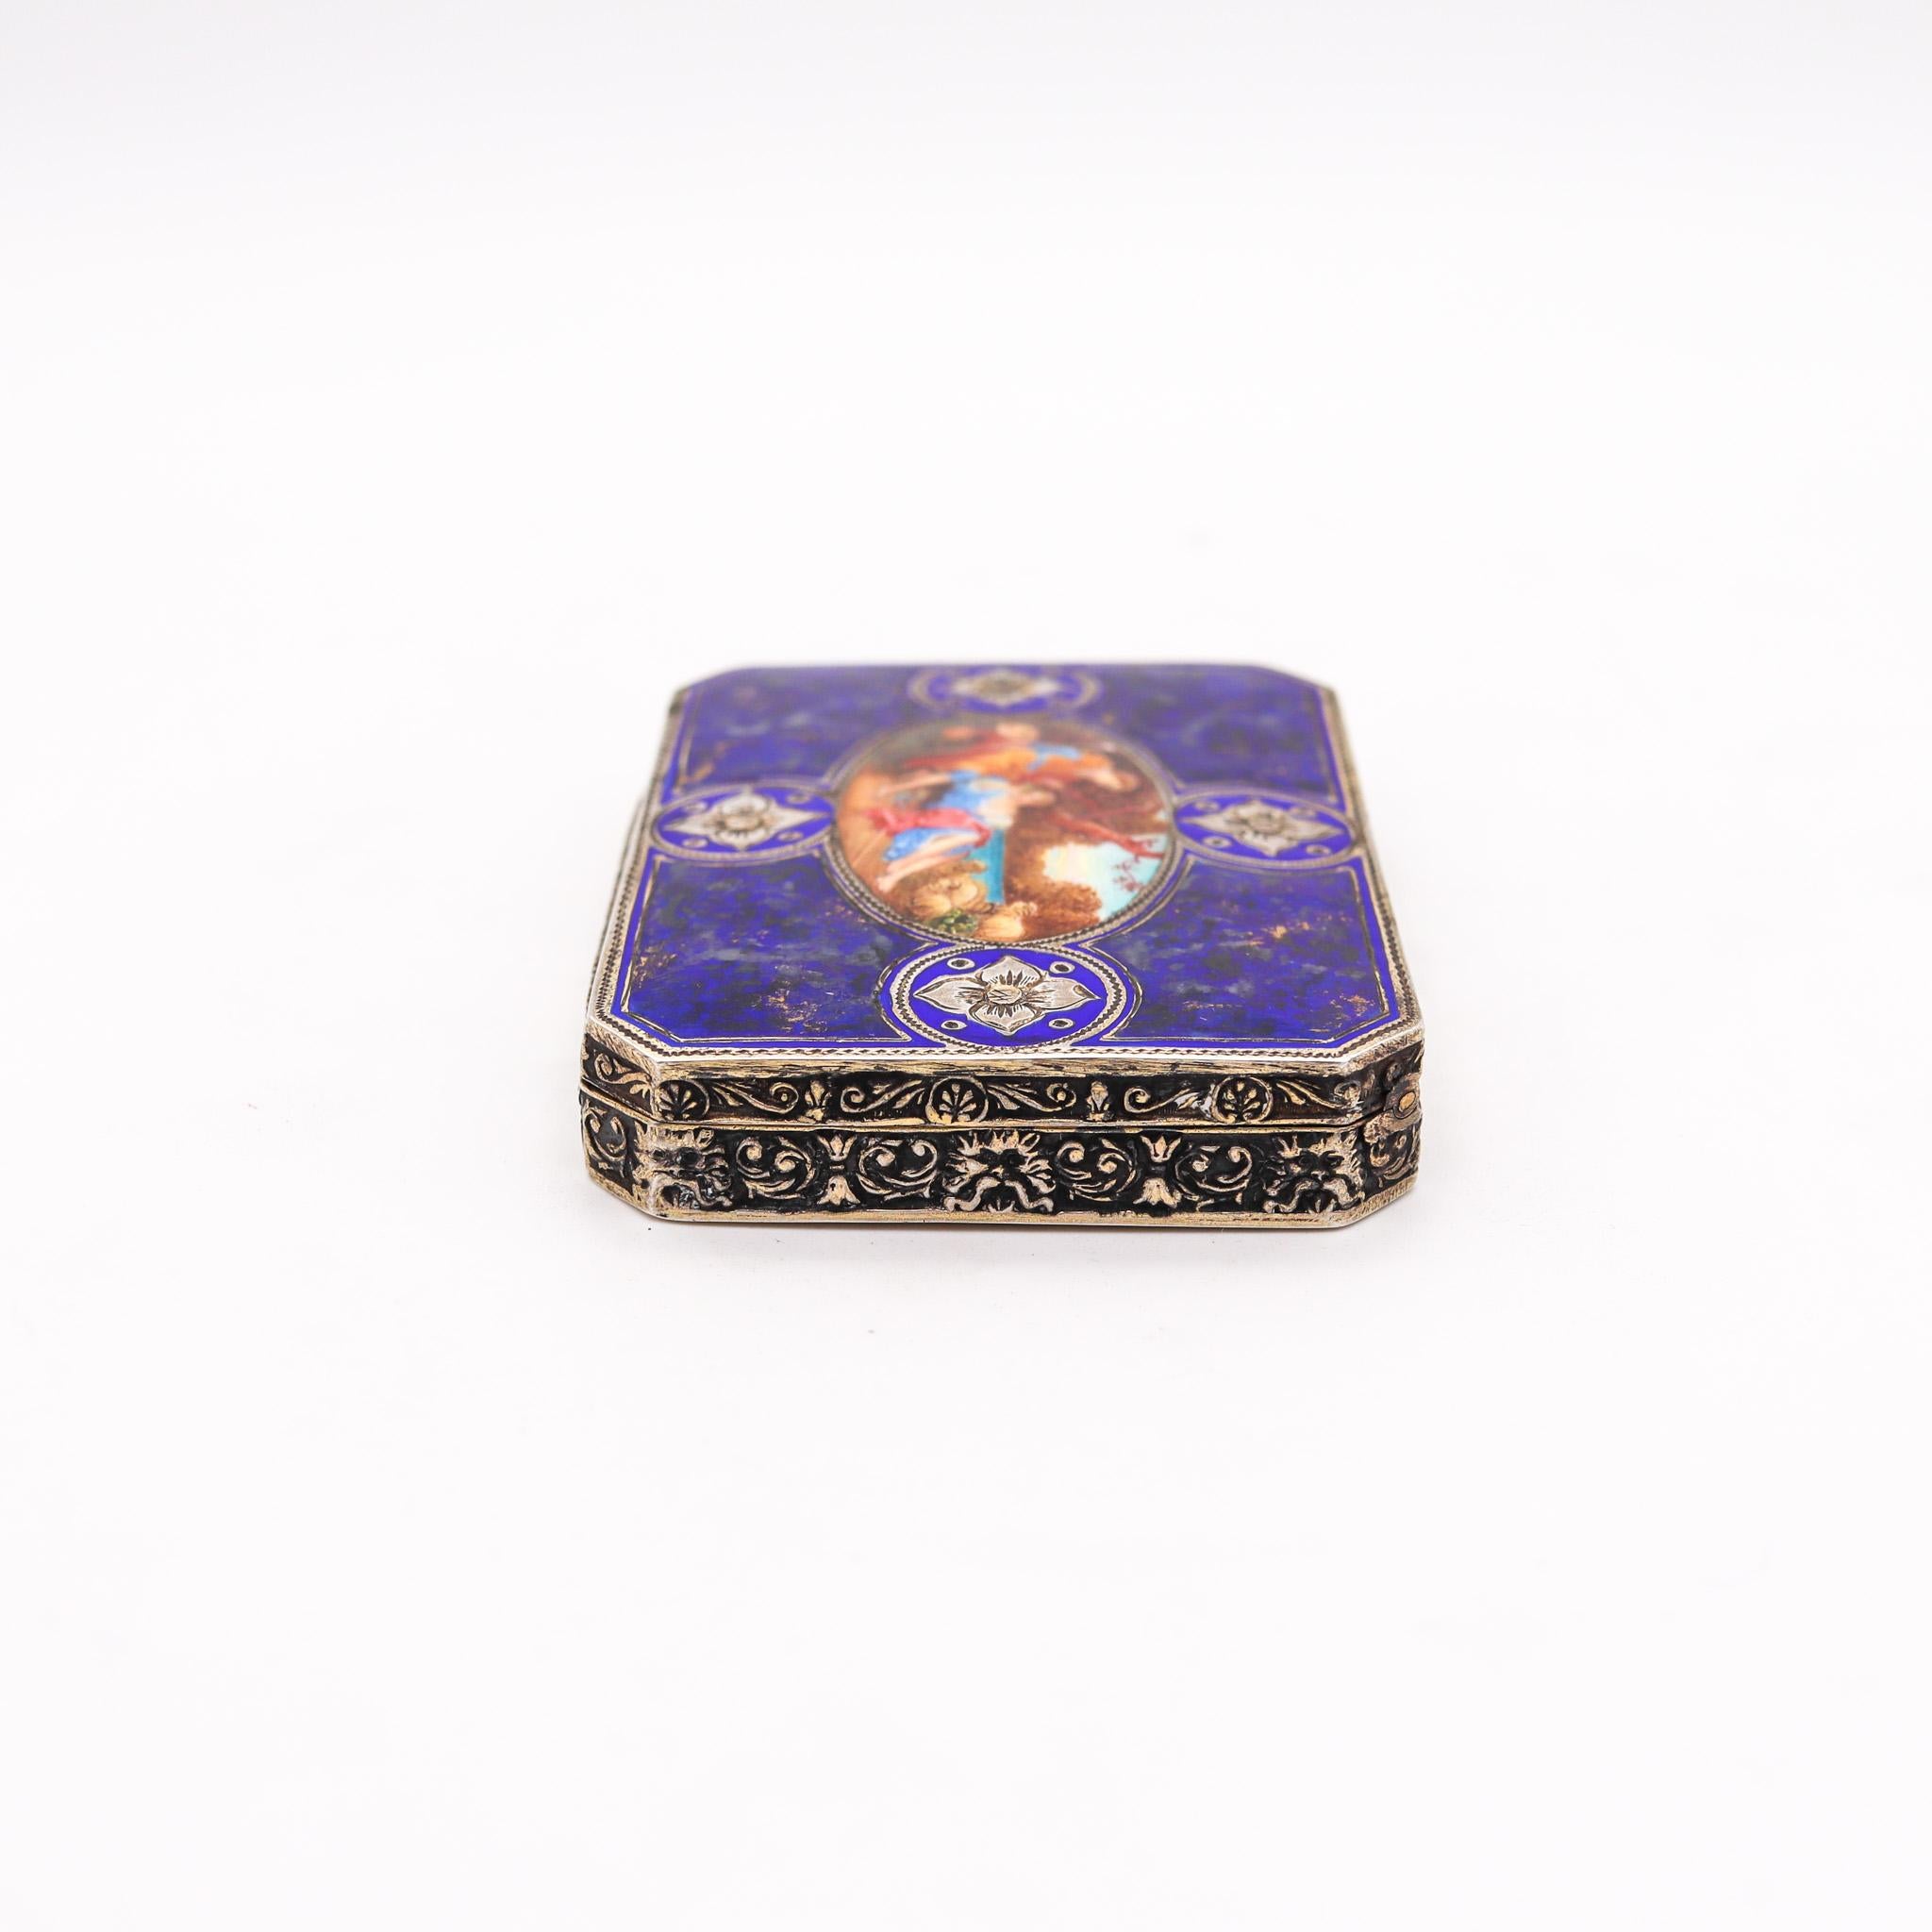 Early 20th Century Italian 1920 Renaissance Revival Enameled Octagonal Box in .800 Silver For Sale